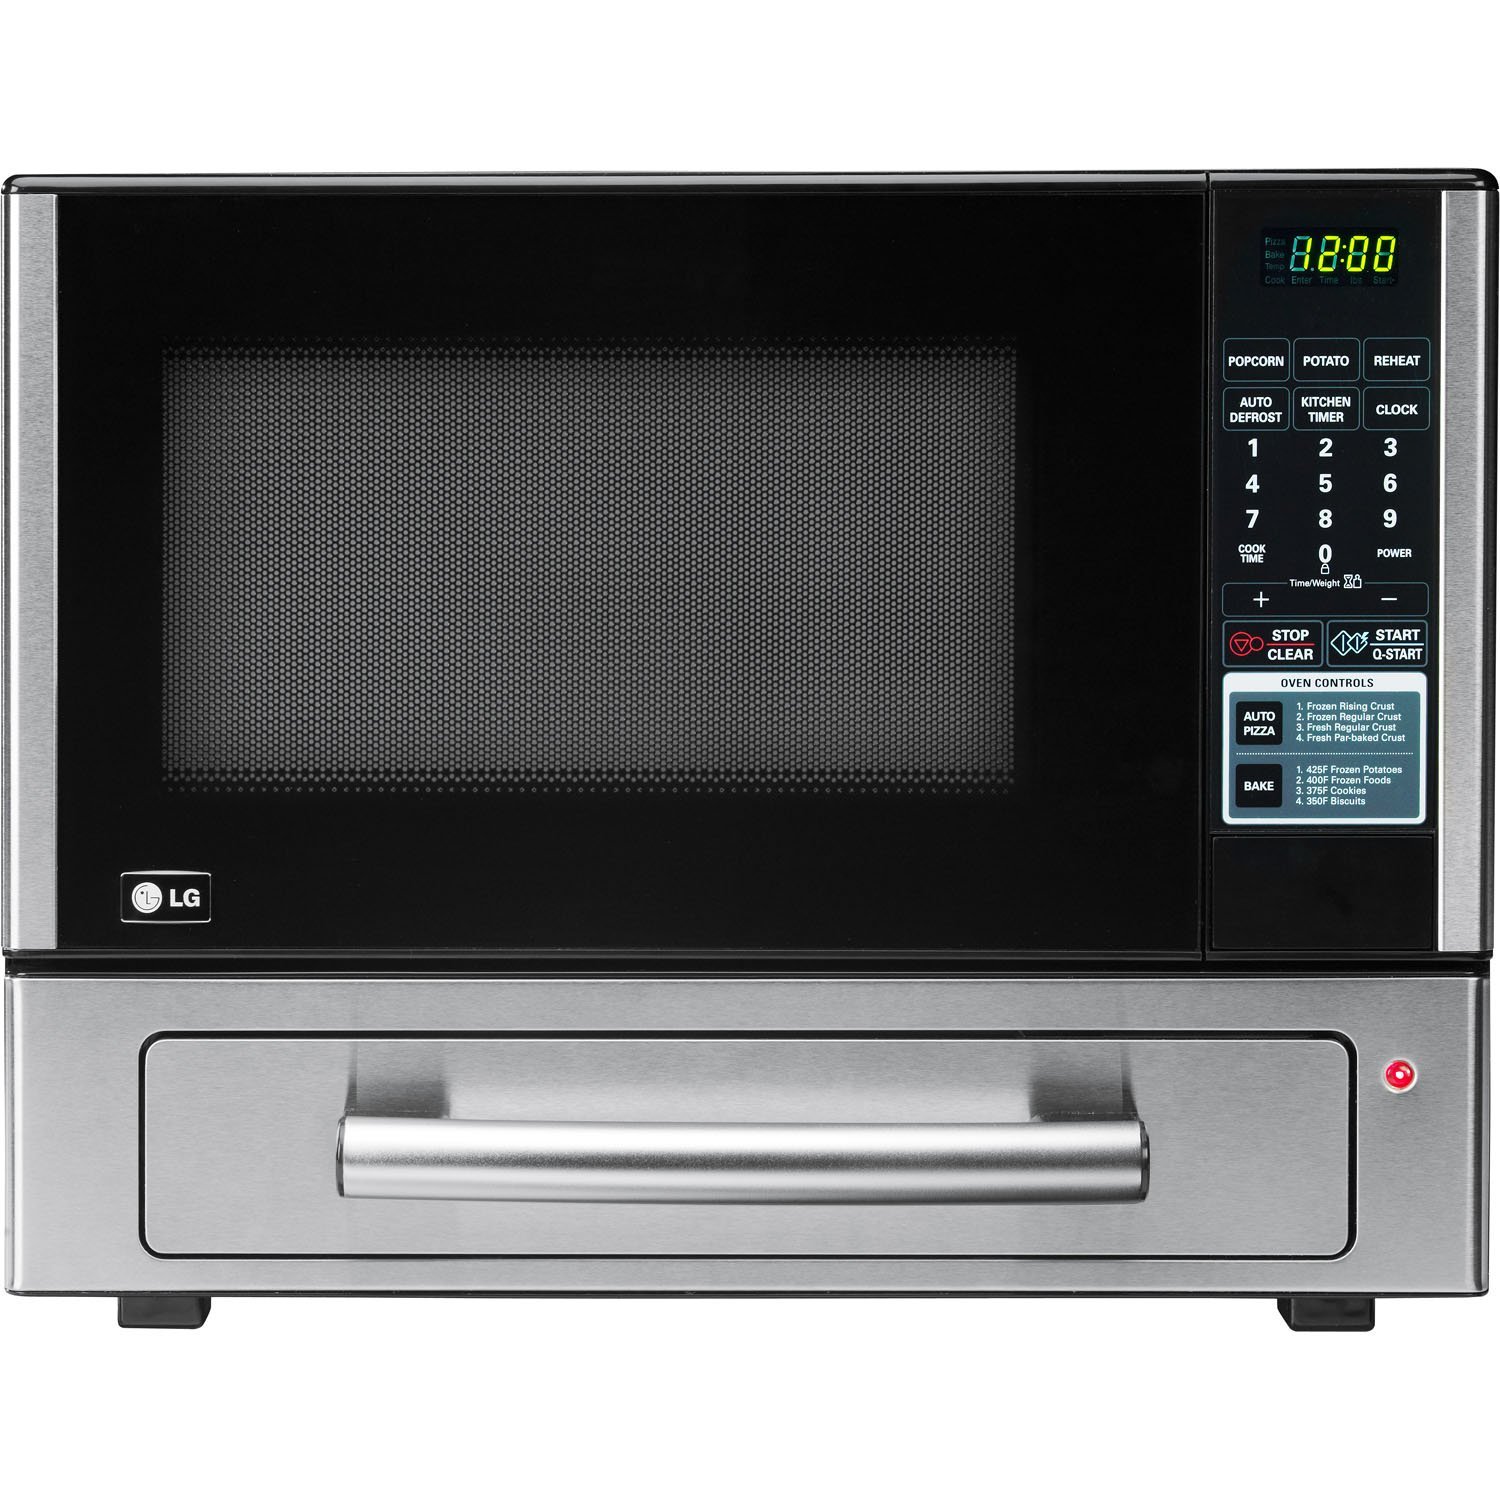 LG LCSP1110ST 1.1 Cu Ft Counter Top Combo Microwave and Baking Oven, Stainless Steel 1